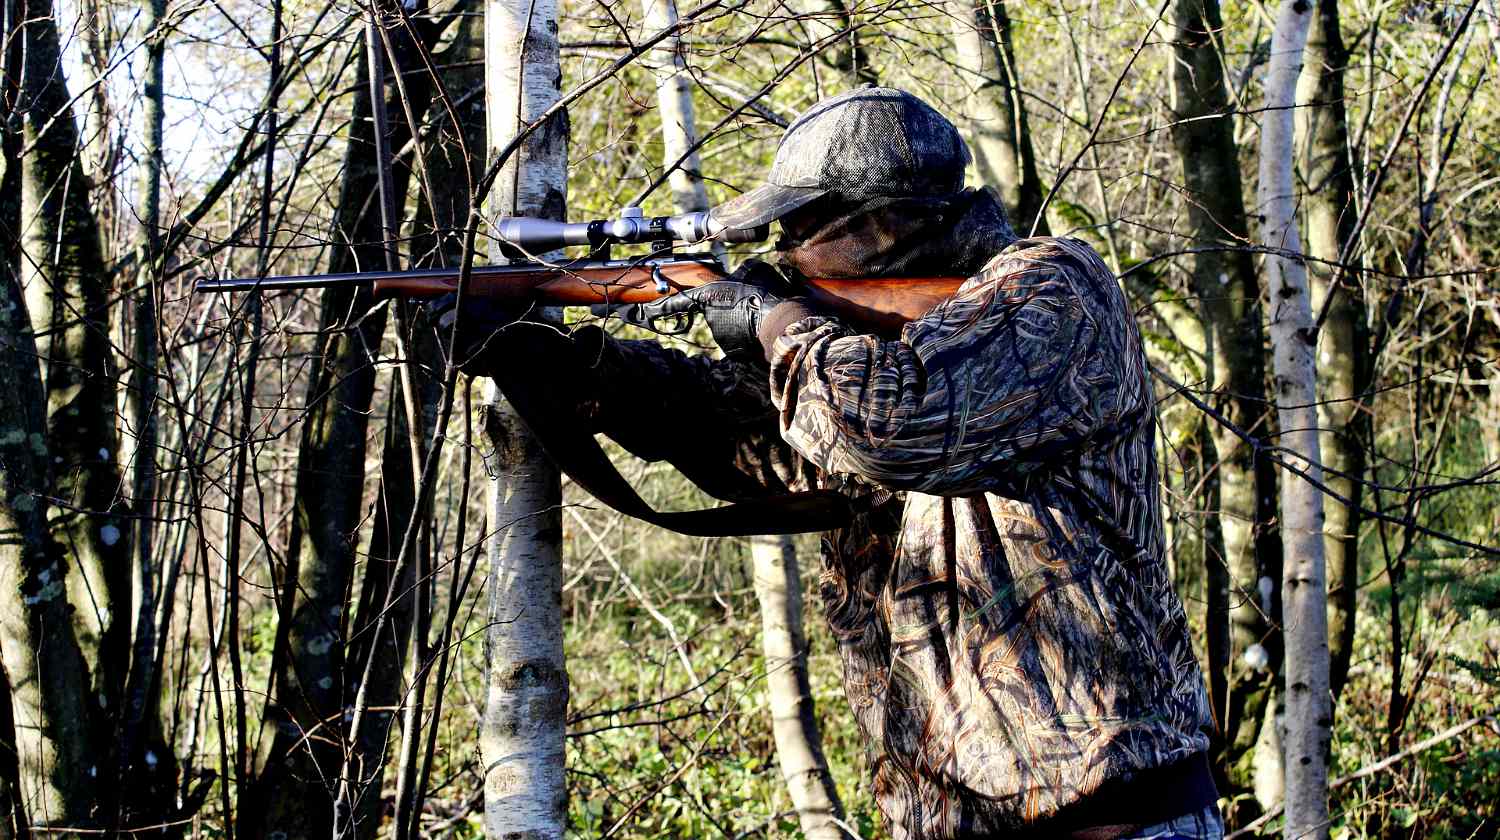 Feature | Hunter with his rifle in the forest | AR-7 | Best Survival Gun?